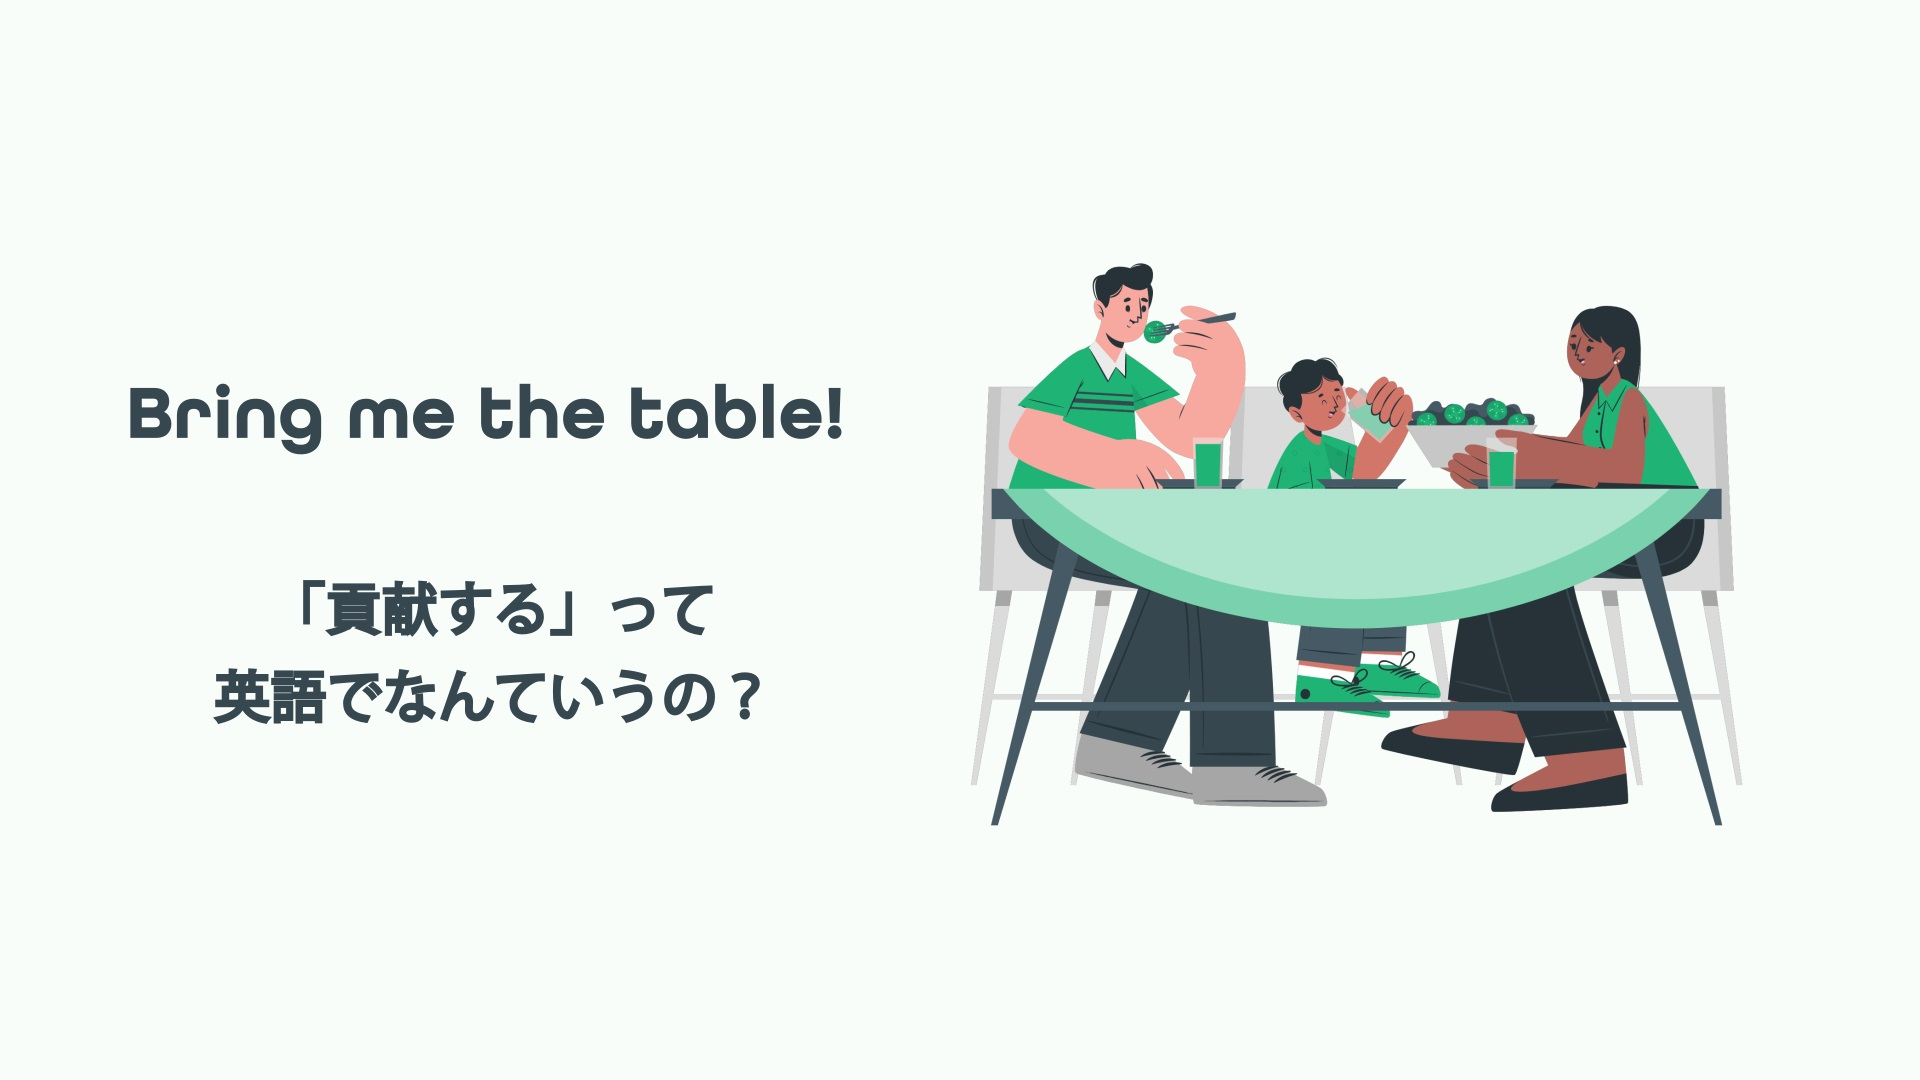 Featured image for “Bring me the table! 「貢献する」って英語でなんていうの？”